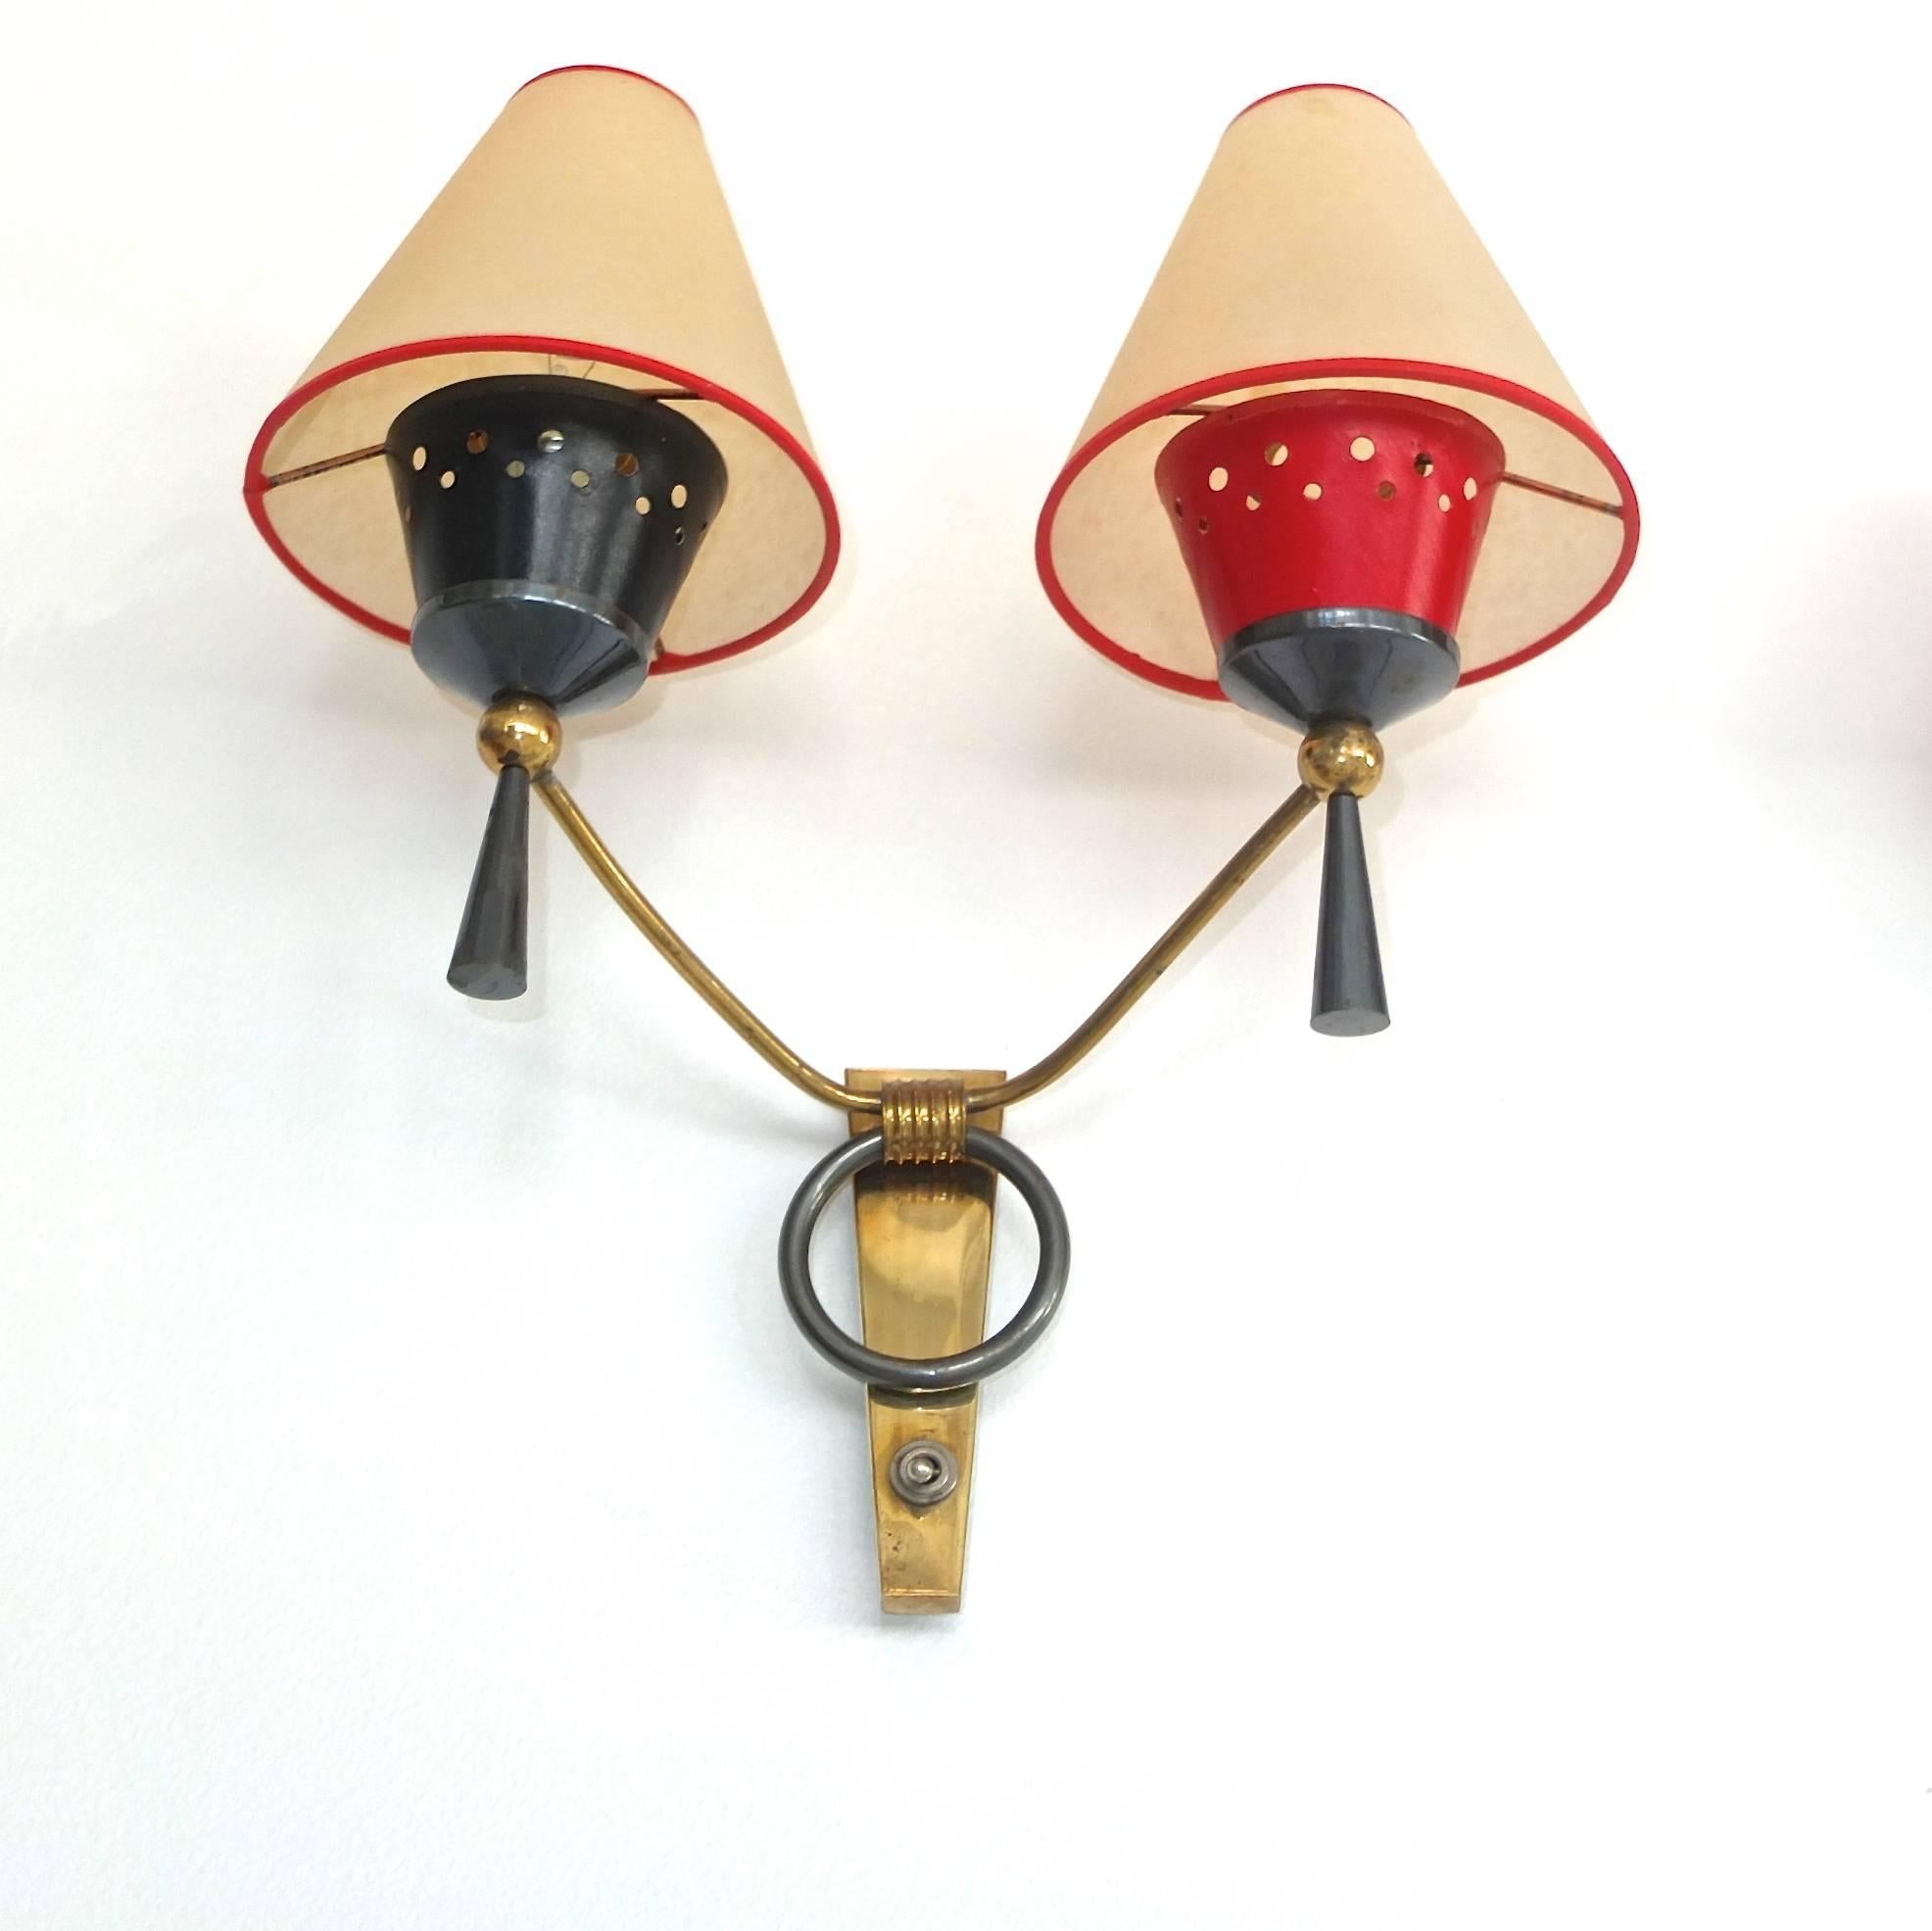 Pair of Maison Lunel Double Arm Sconces with Original Abat Jour In Good Condition For Sale In Hanover, MA